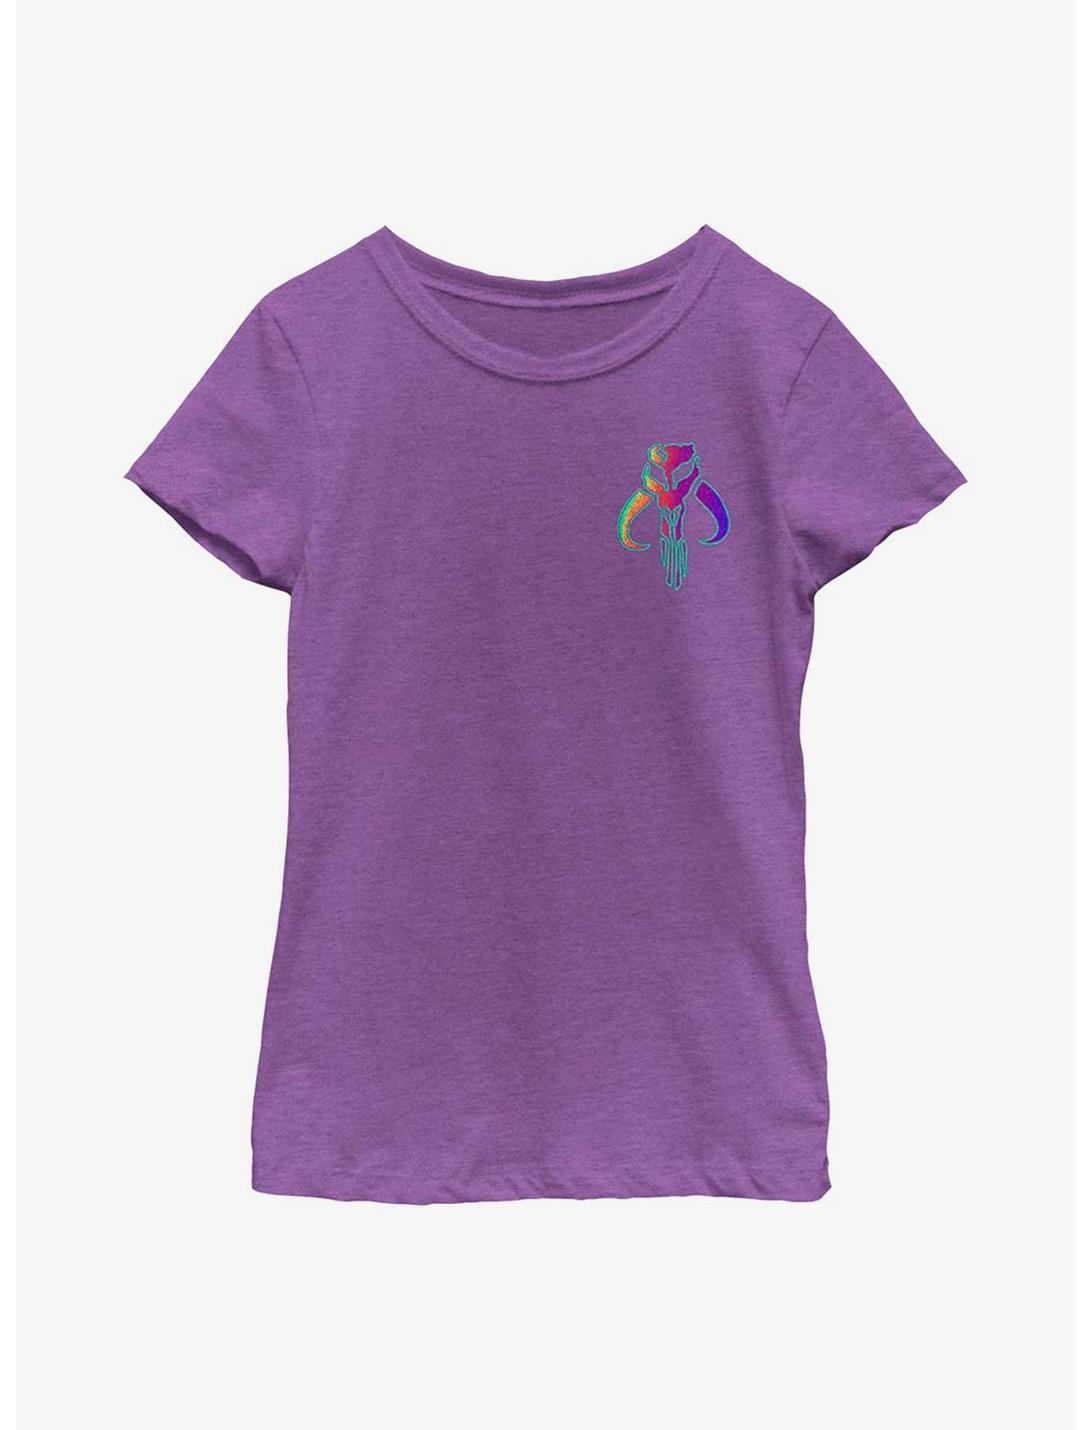 Star Wars The Mandalorian Neon Primary Icon Youth Girls T-Shirt, PURPLE BERRY, hi-res